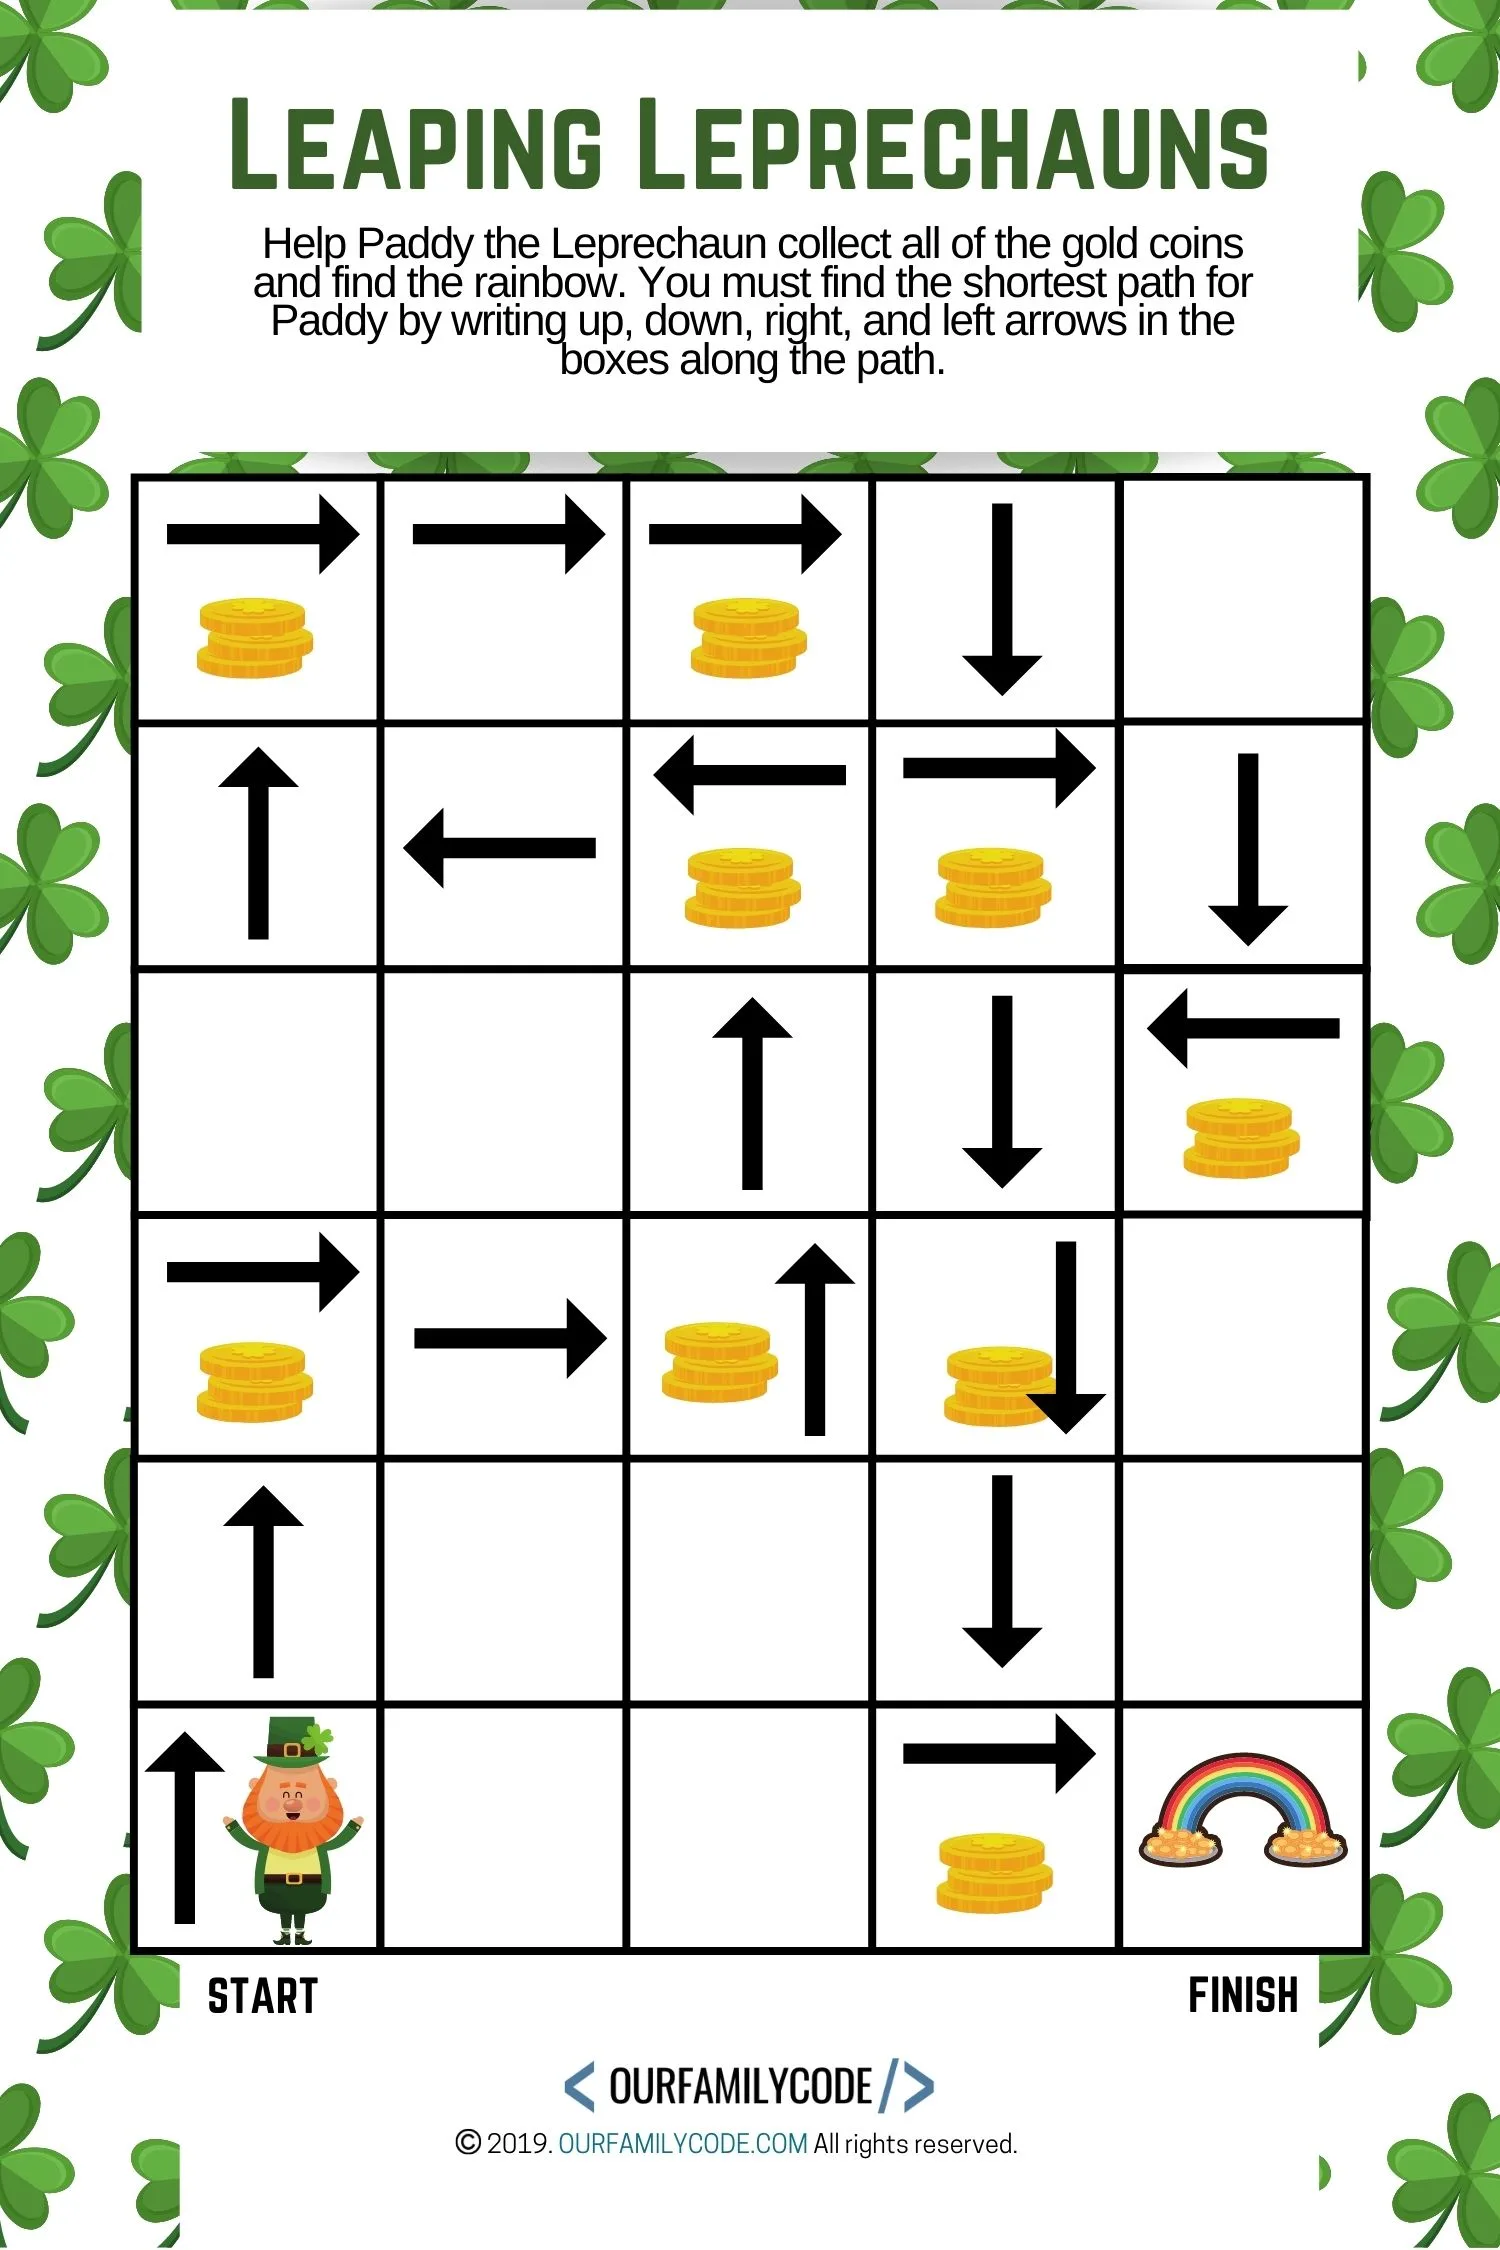 Help Paddy the Leprechaun collect all of his gold coins and get to the rainbow by coding the shortest sequence in this leprechaun sequence coding activity!! #teachkidstocode #freeworksheets #codingactivitiesforkids #STEM #STEAM #unpluggedcoding 